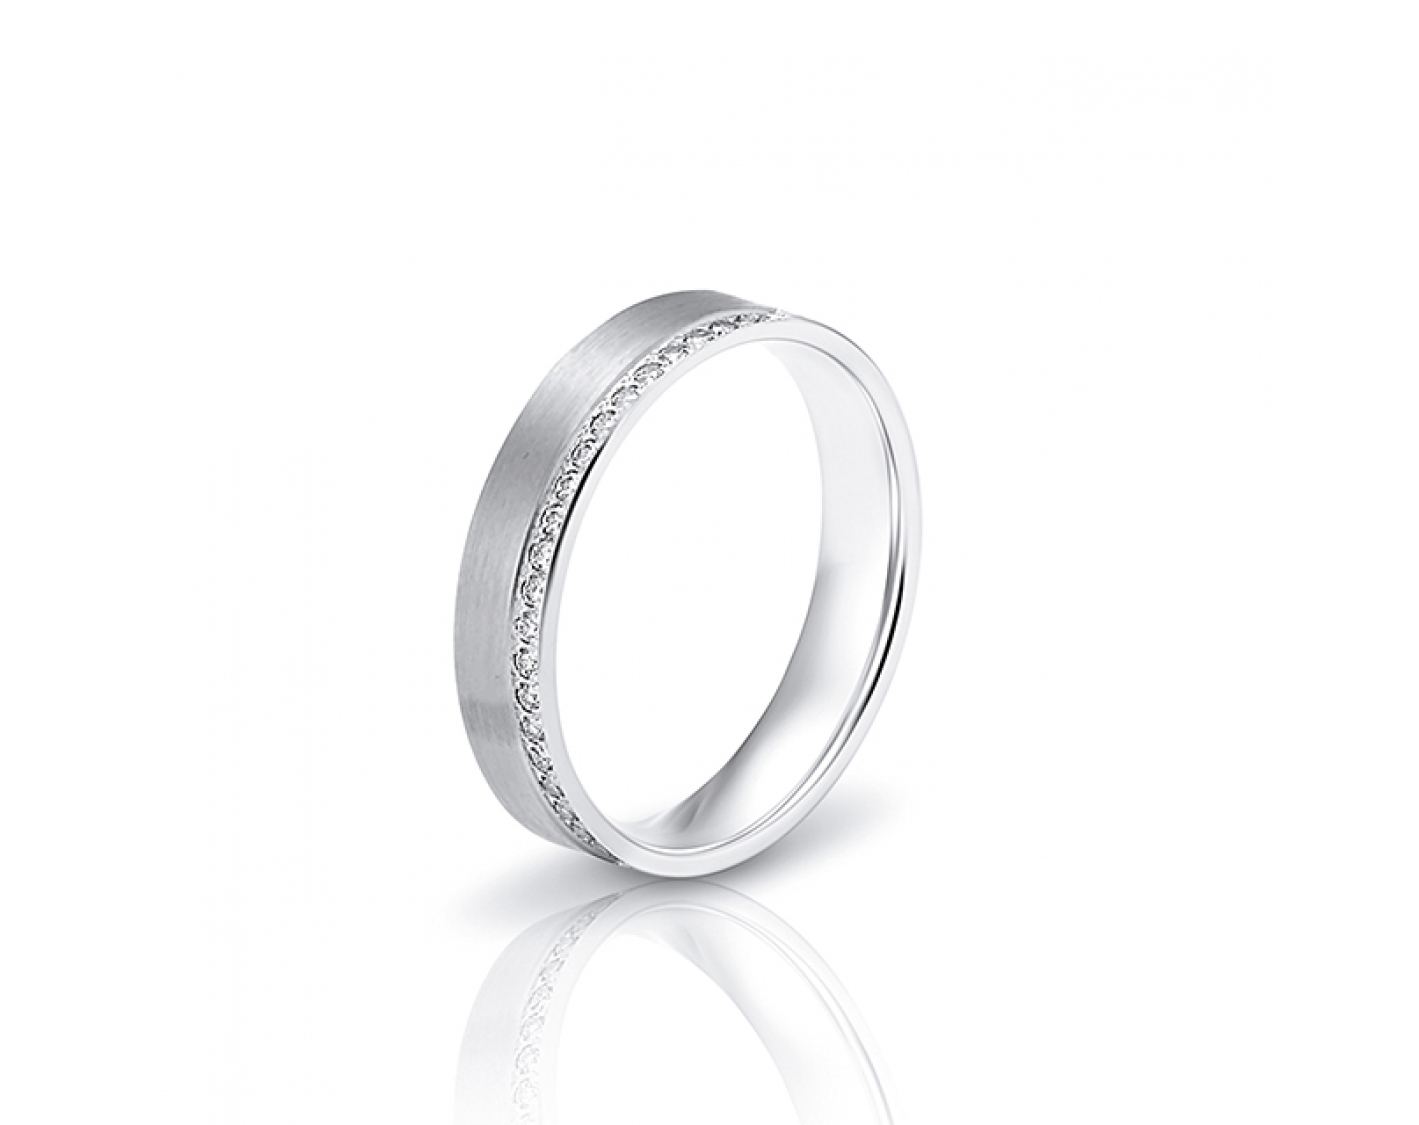 18k white gold 4,5mm two-toned* matte full eternity wedding band with a shiny edge